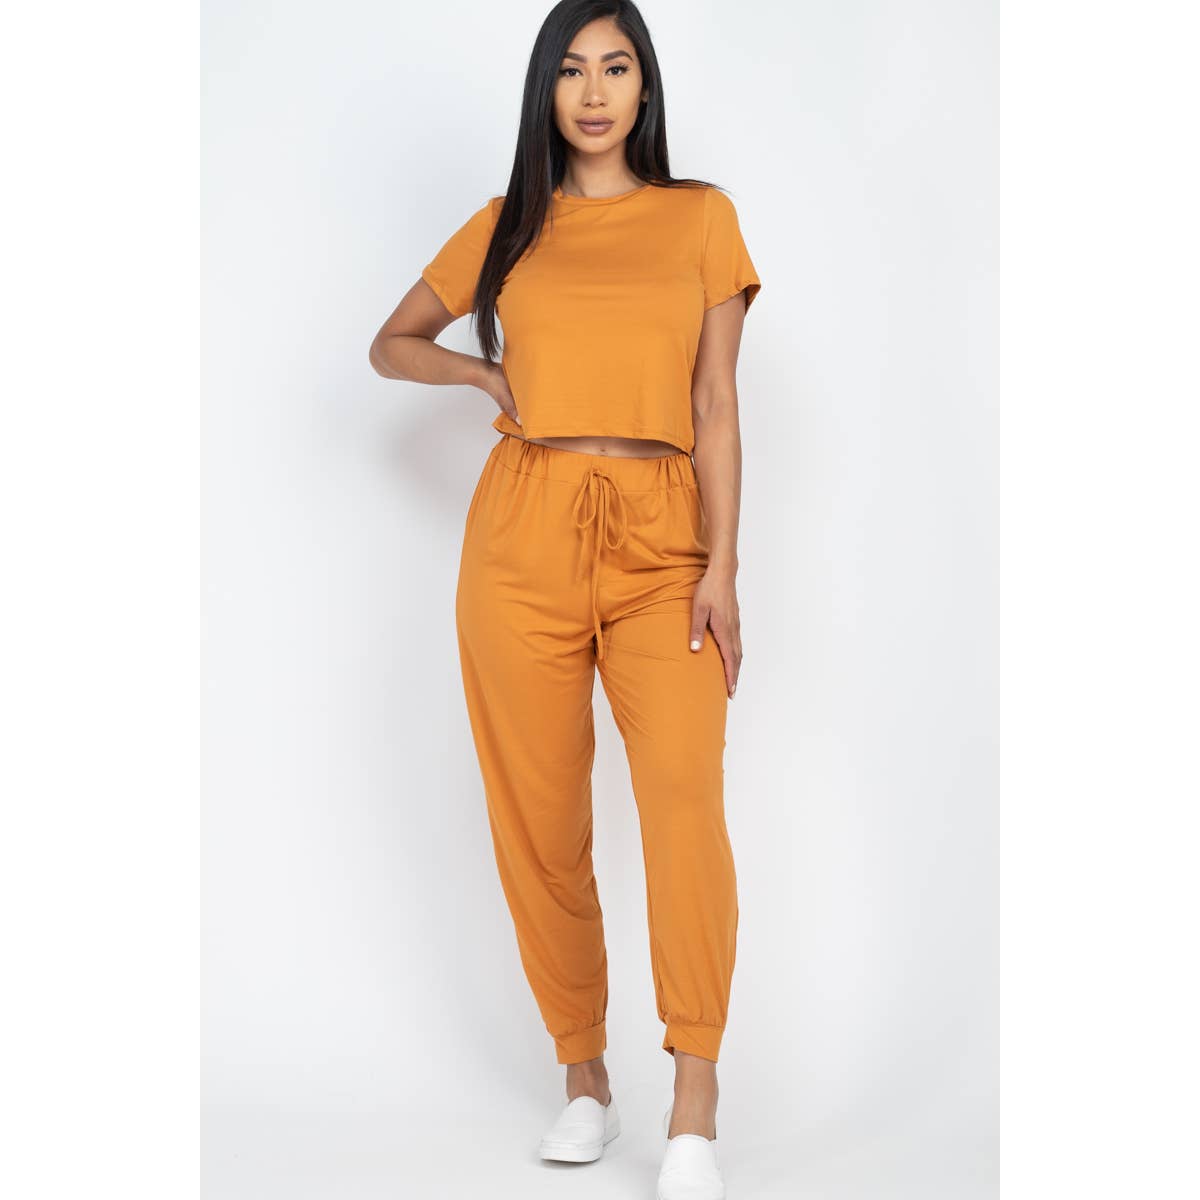 Solid basic Top and pants set